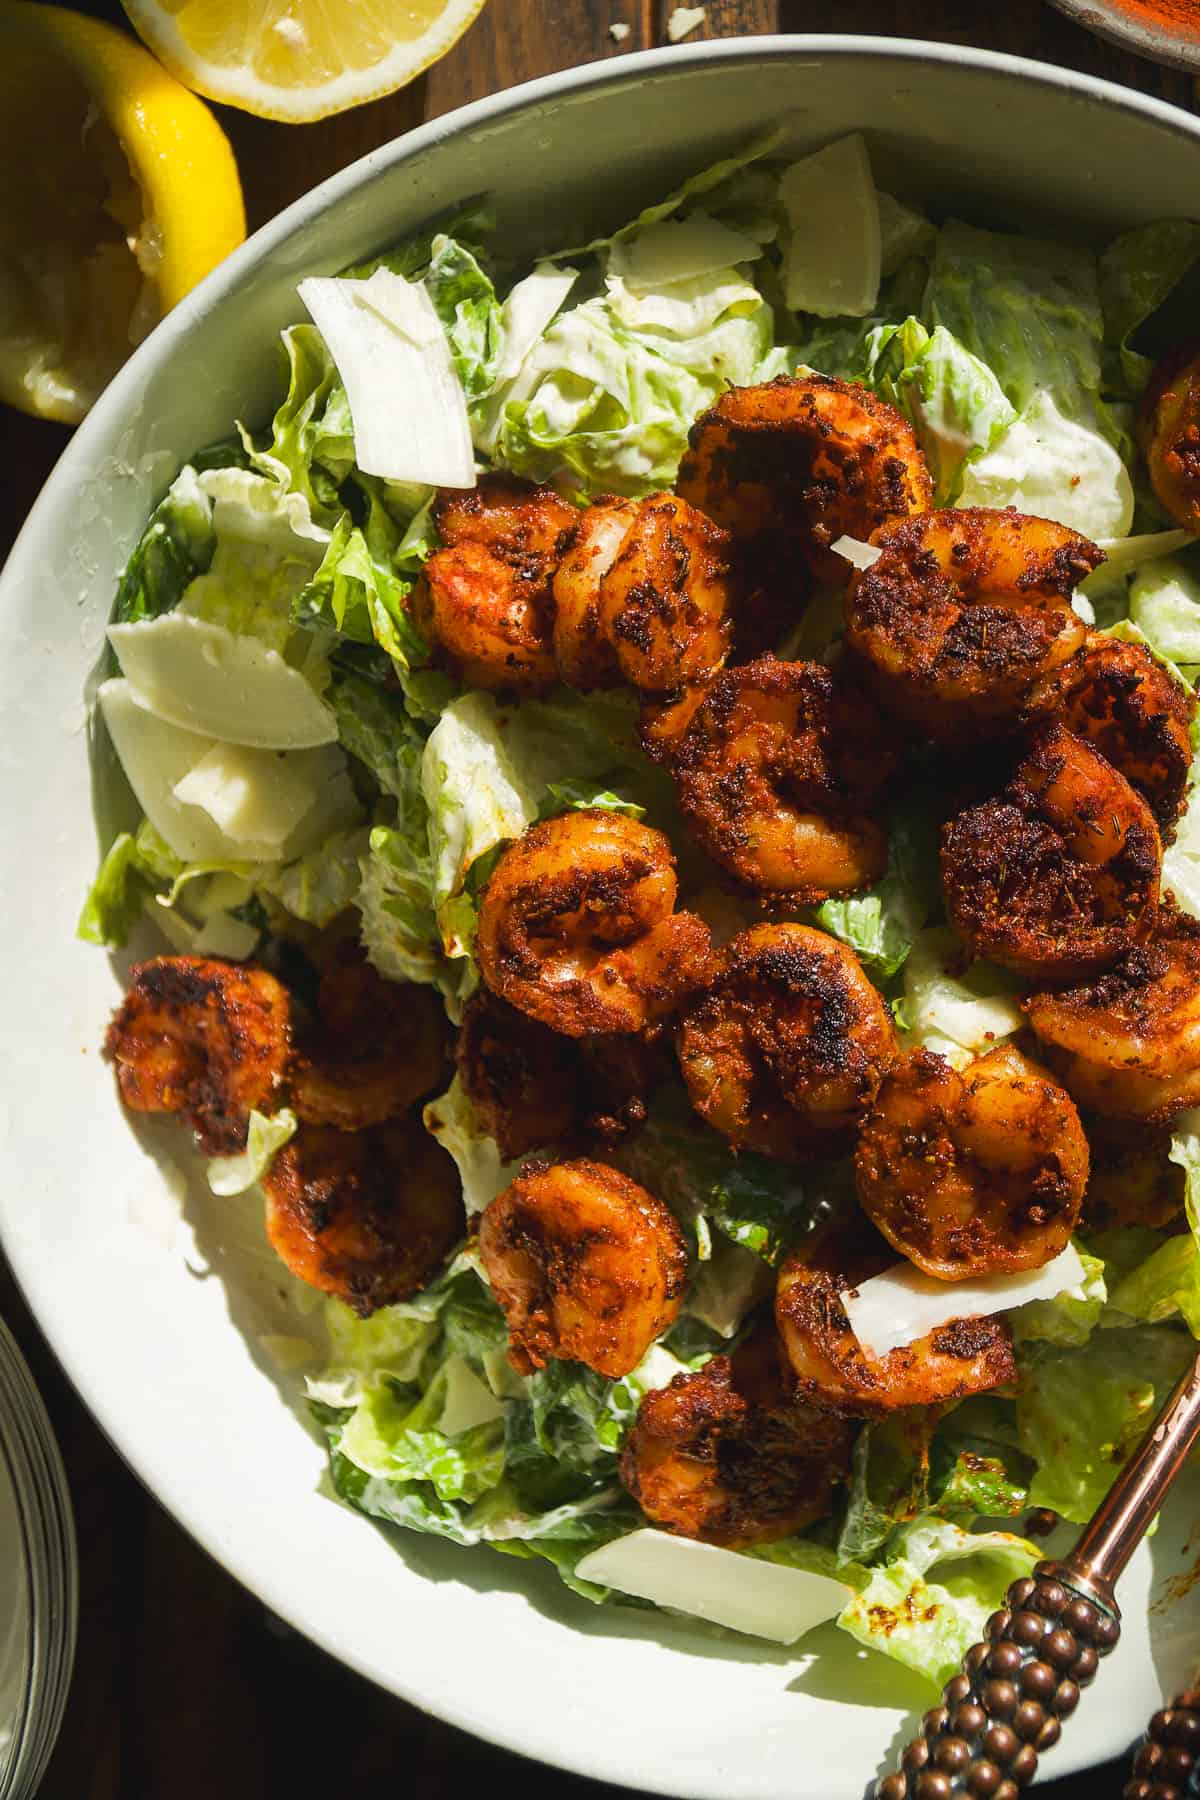 Caesar salad with blackened shrimp on top in a large bowl.